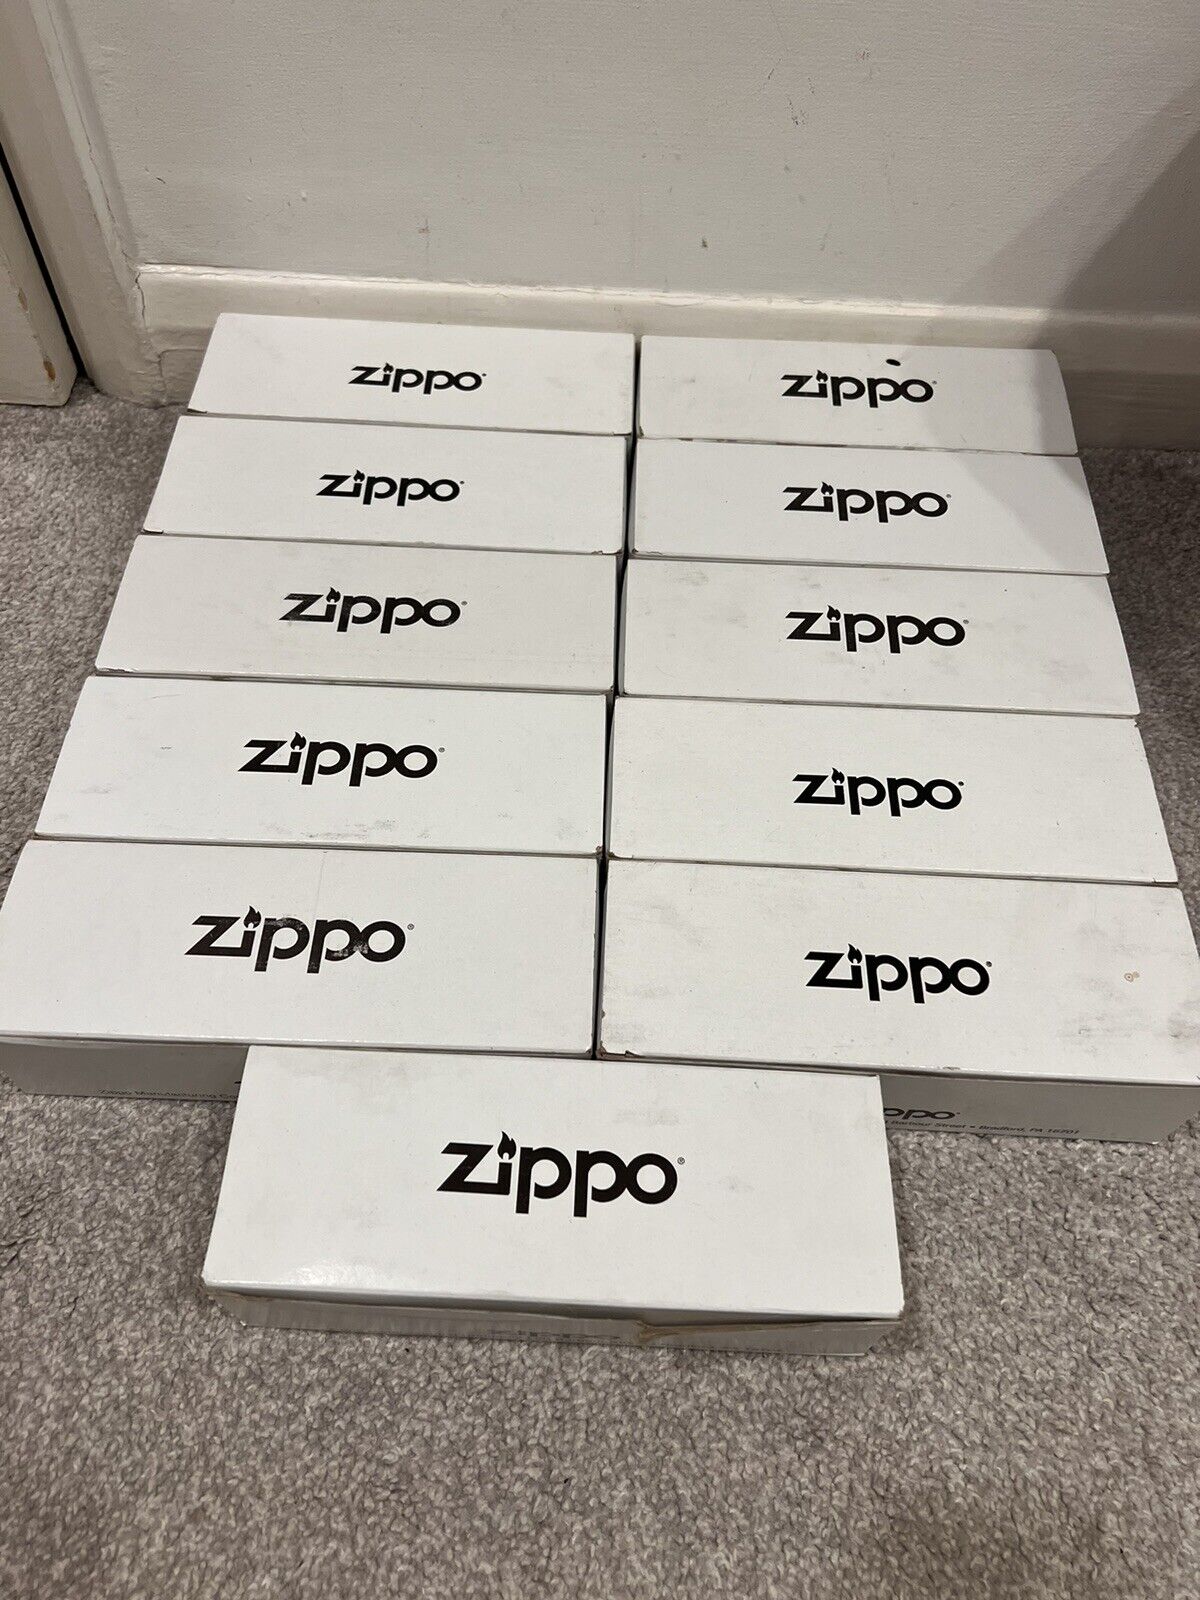 113 Brand New & Boxed ZIPPO Lighters - JOB LOT - Mixed Designs RRP £5k